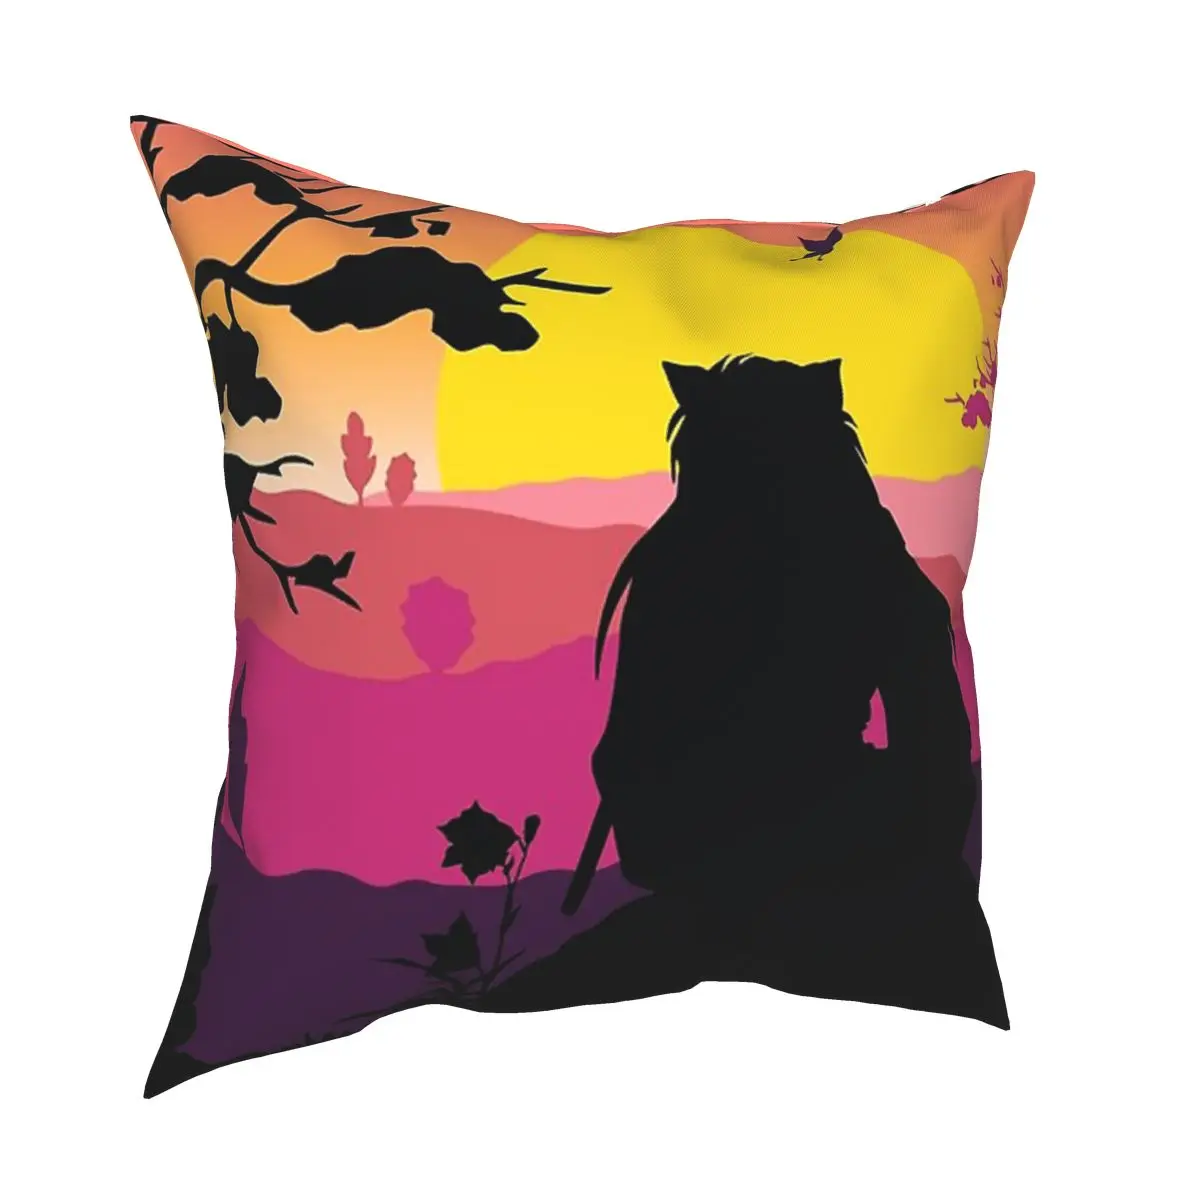 

InuYasha Sunset Pillowcase Home Decorative Anime Manga Cushion Cover Throw Pillow for Car Polyester Double-sided Printing Casual